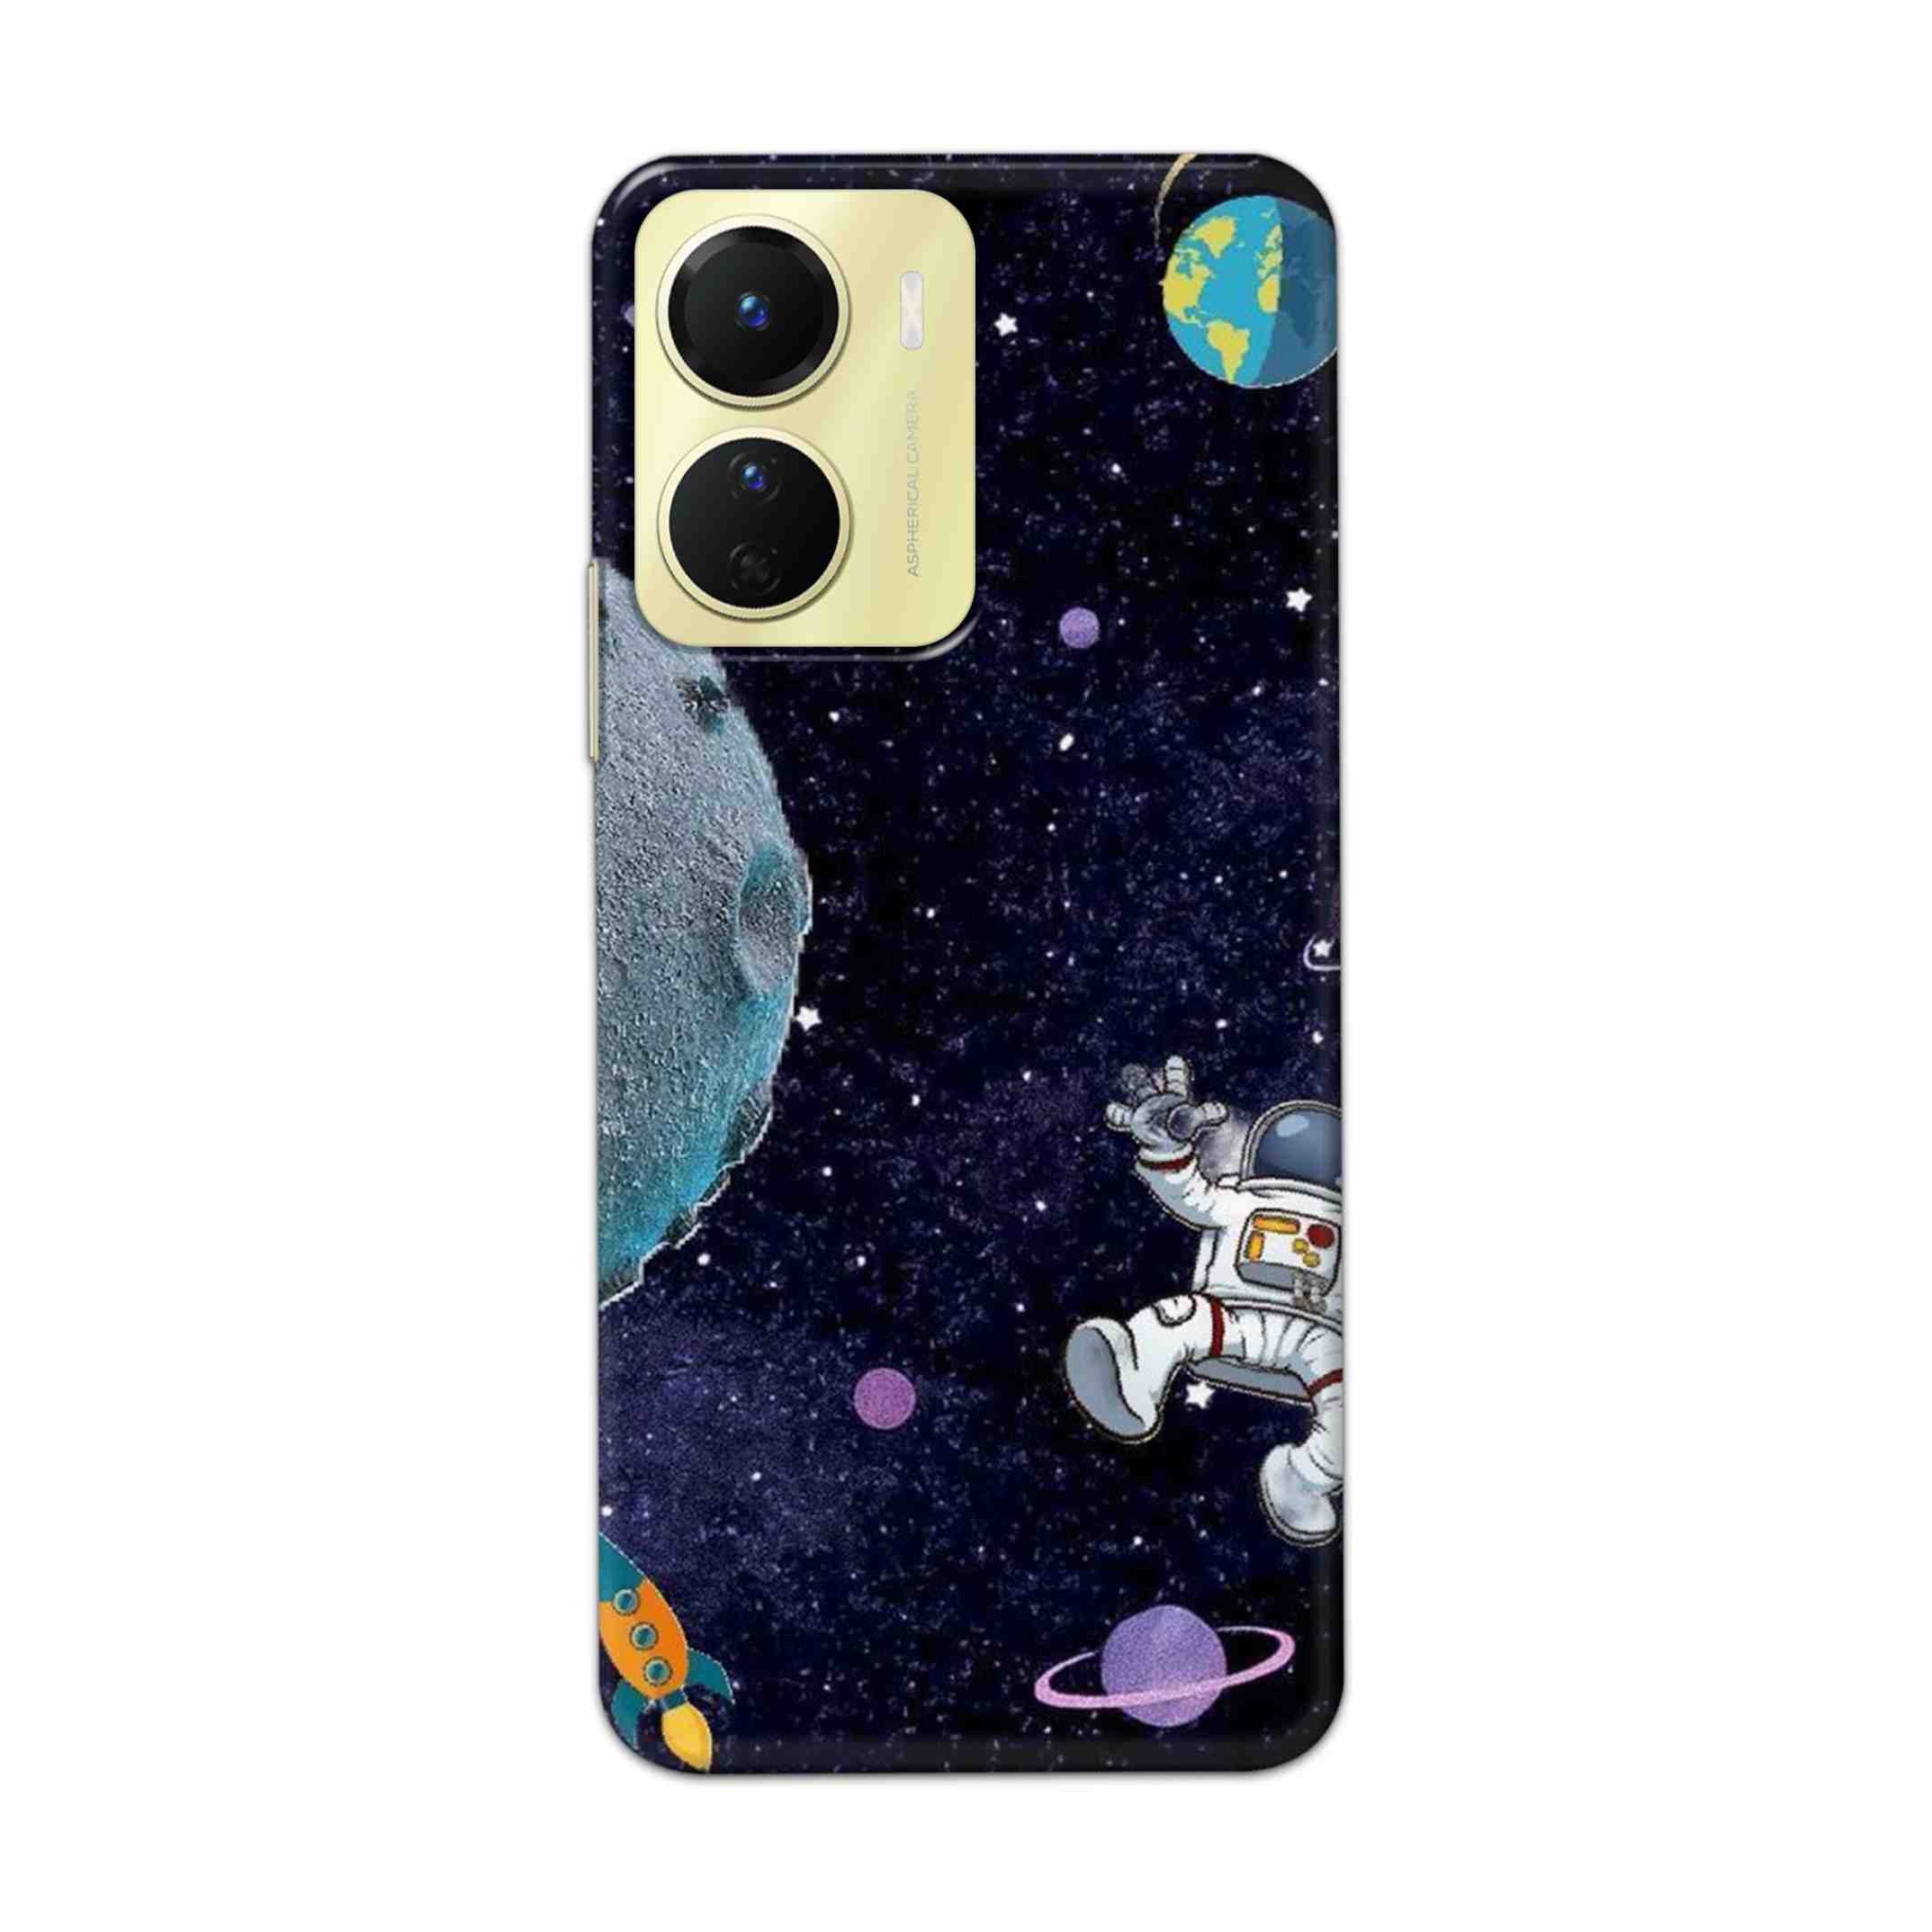 Buy Space Hard Back Mobile Phone Case Cover For Vivo Y16 Online